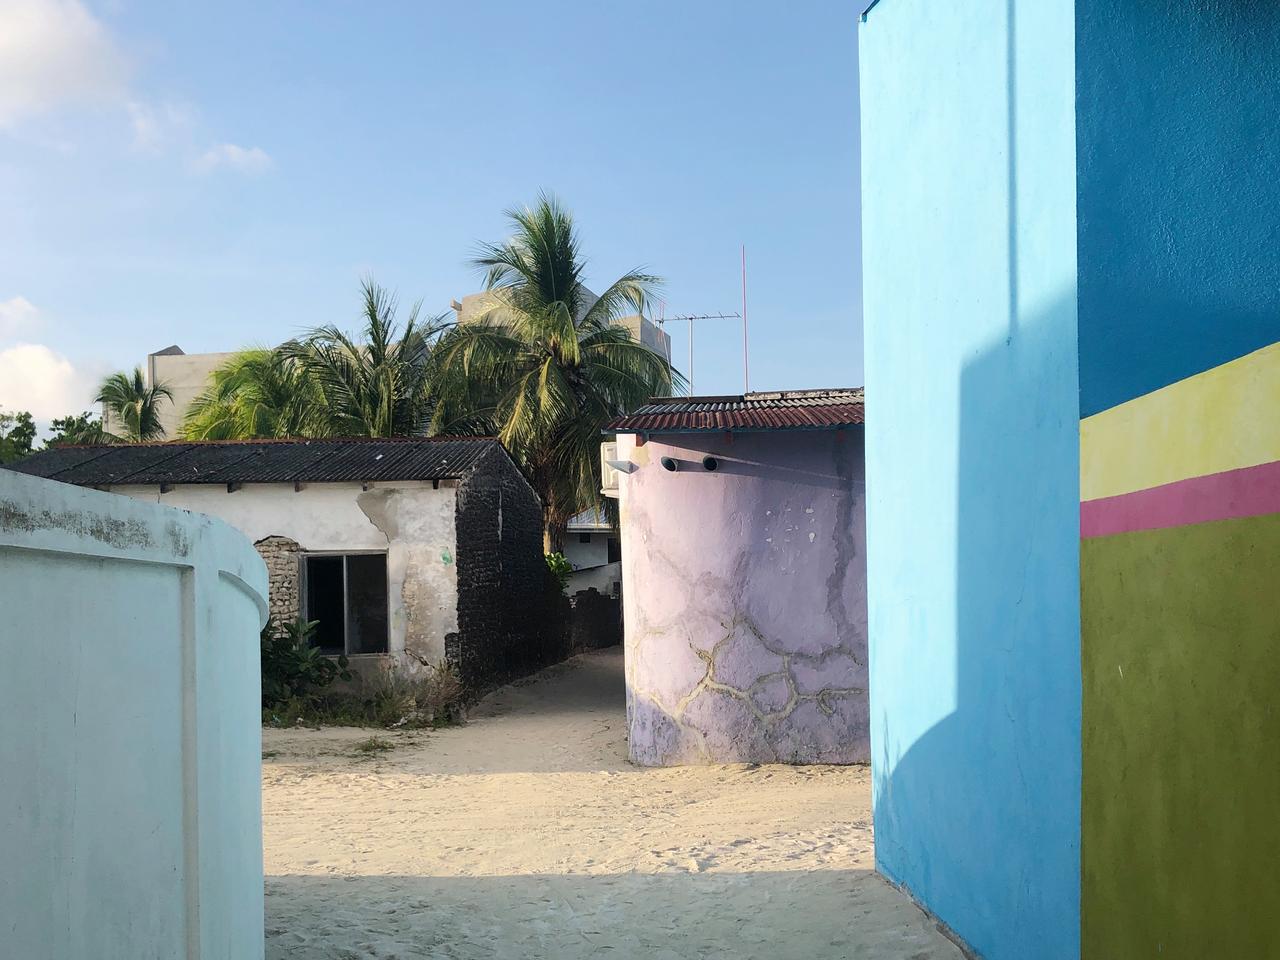 The colourful cement houses of the Maldives local villages. Picture: Secret Paradise are painted blue, aqua, pink, yellow and red,